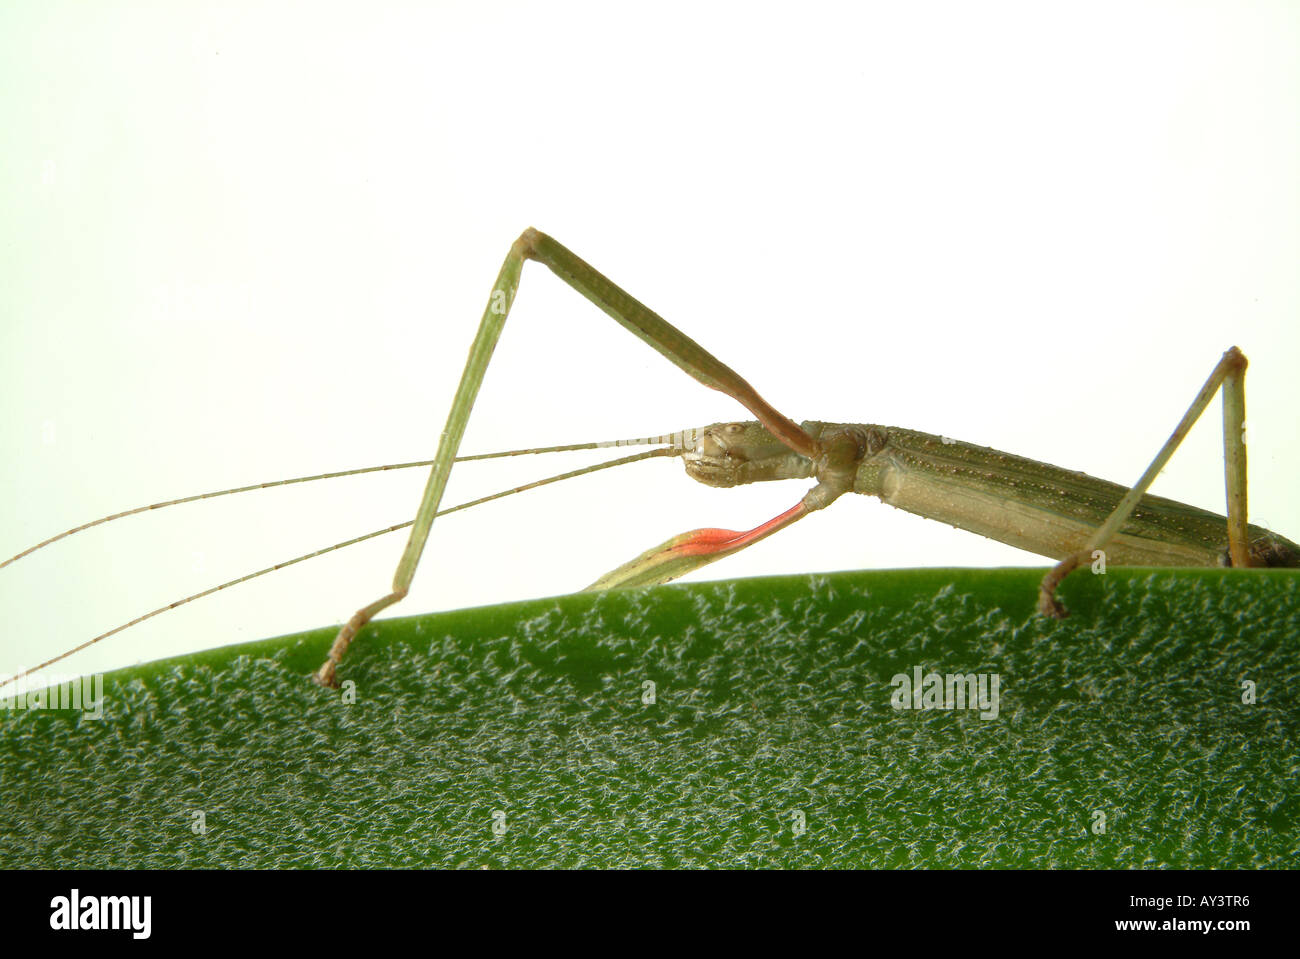 Carausius morosus Indian stick insect Stock Photo